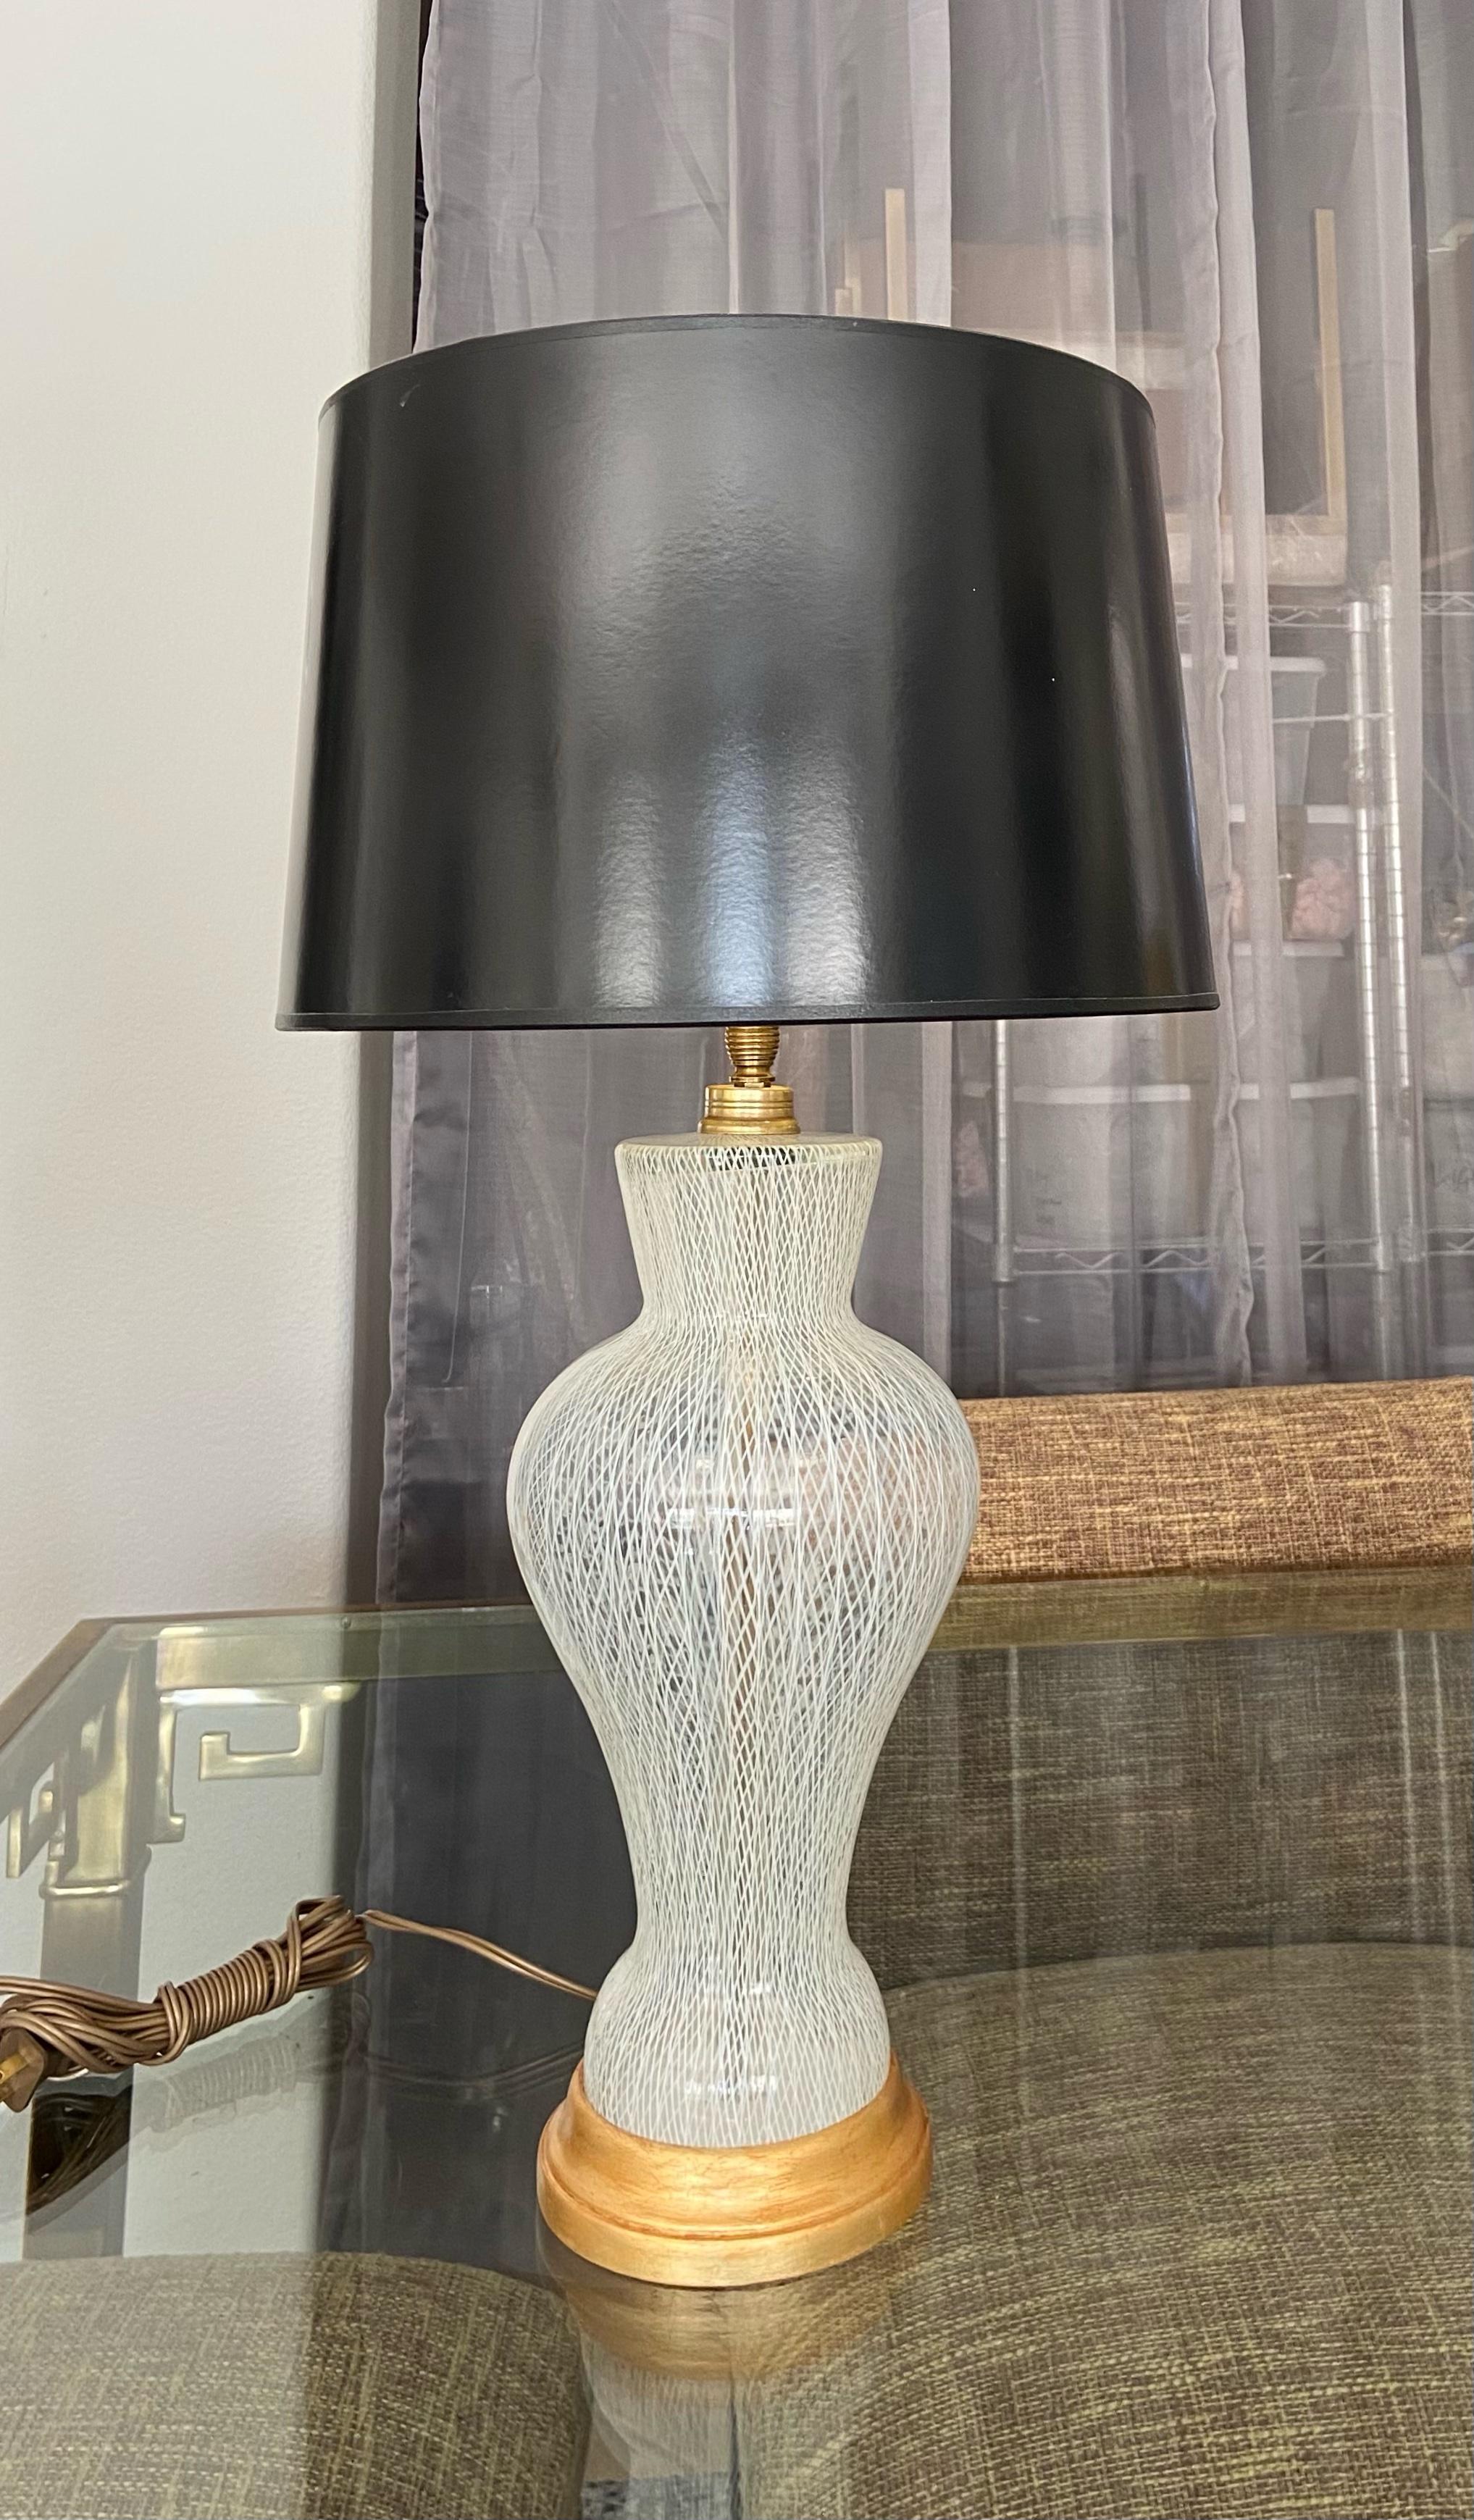 Single Salviati Venetian Murano Art Glass latticino (white lace) pattern table lamp, on giltwood base with brass fittings. Newly wired with new 3-way brass socket and cord. The glass hand blown accented in multiple latticino, meaning lace patterns